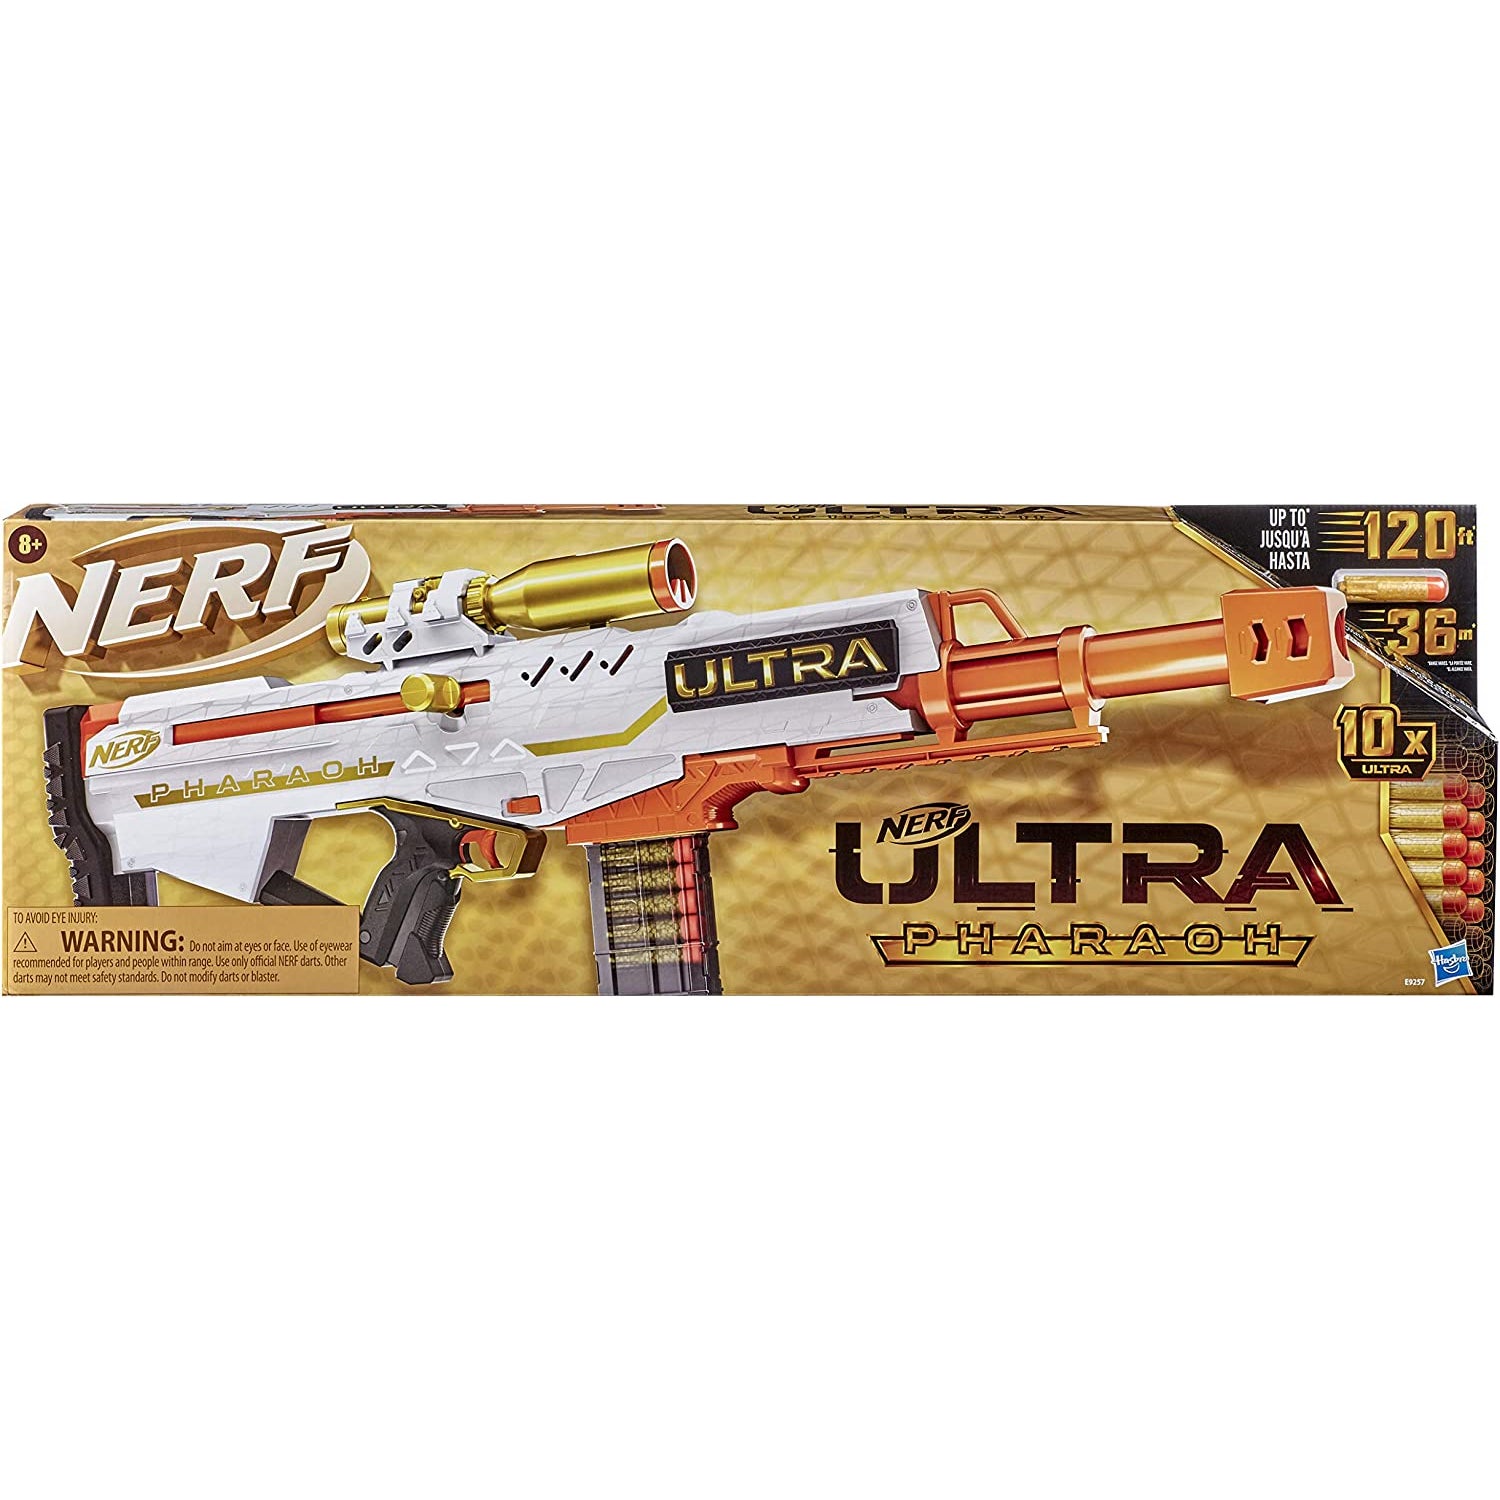 NERF Ultra Pharaoh Blaster with Premium Gold Accents, 10-Dart Clip